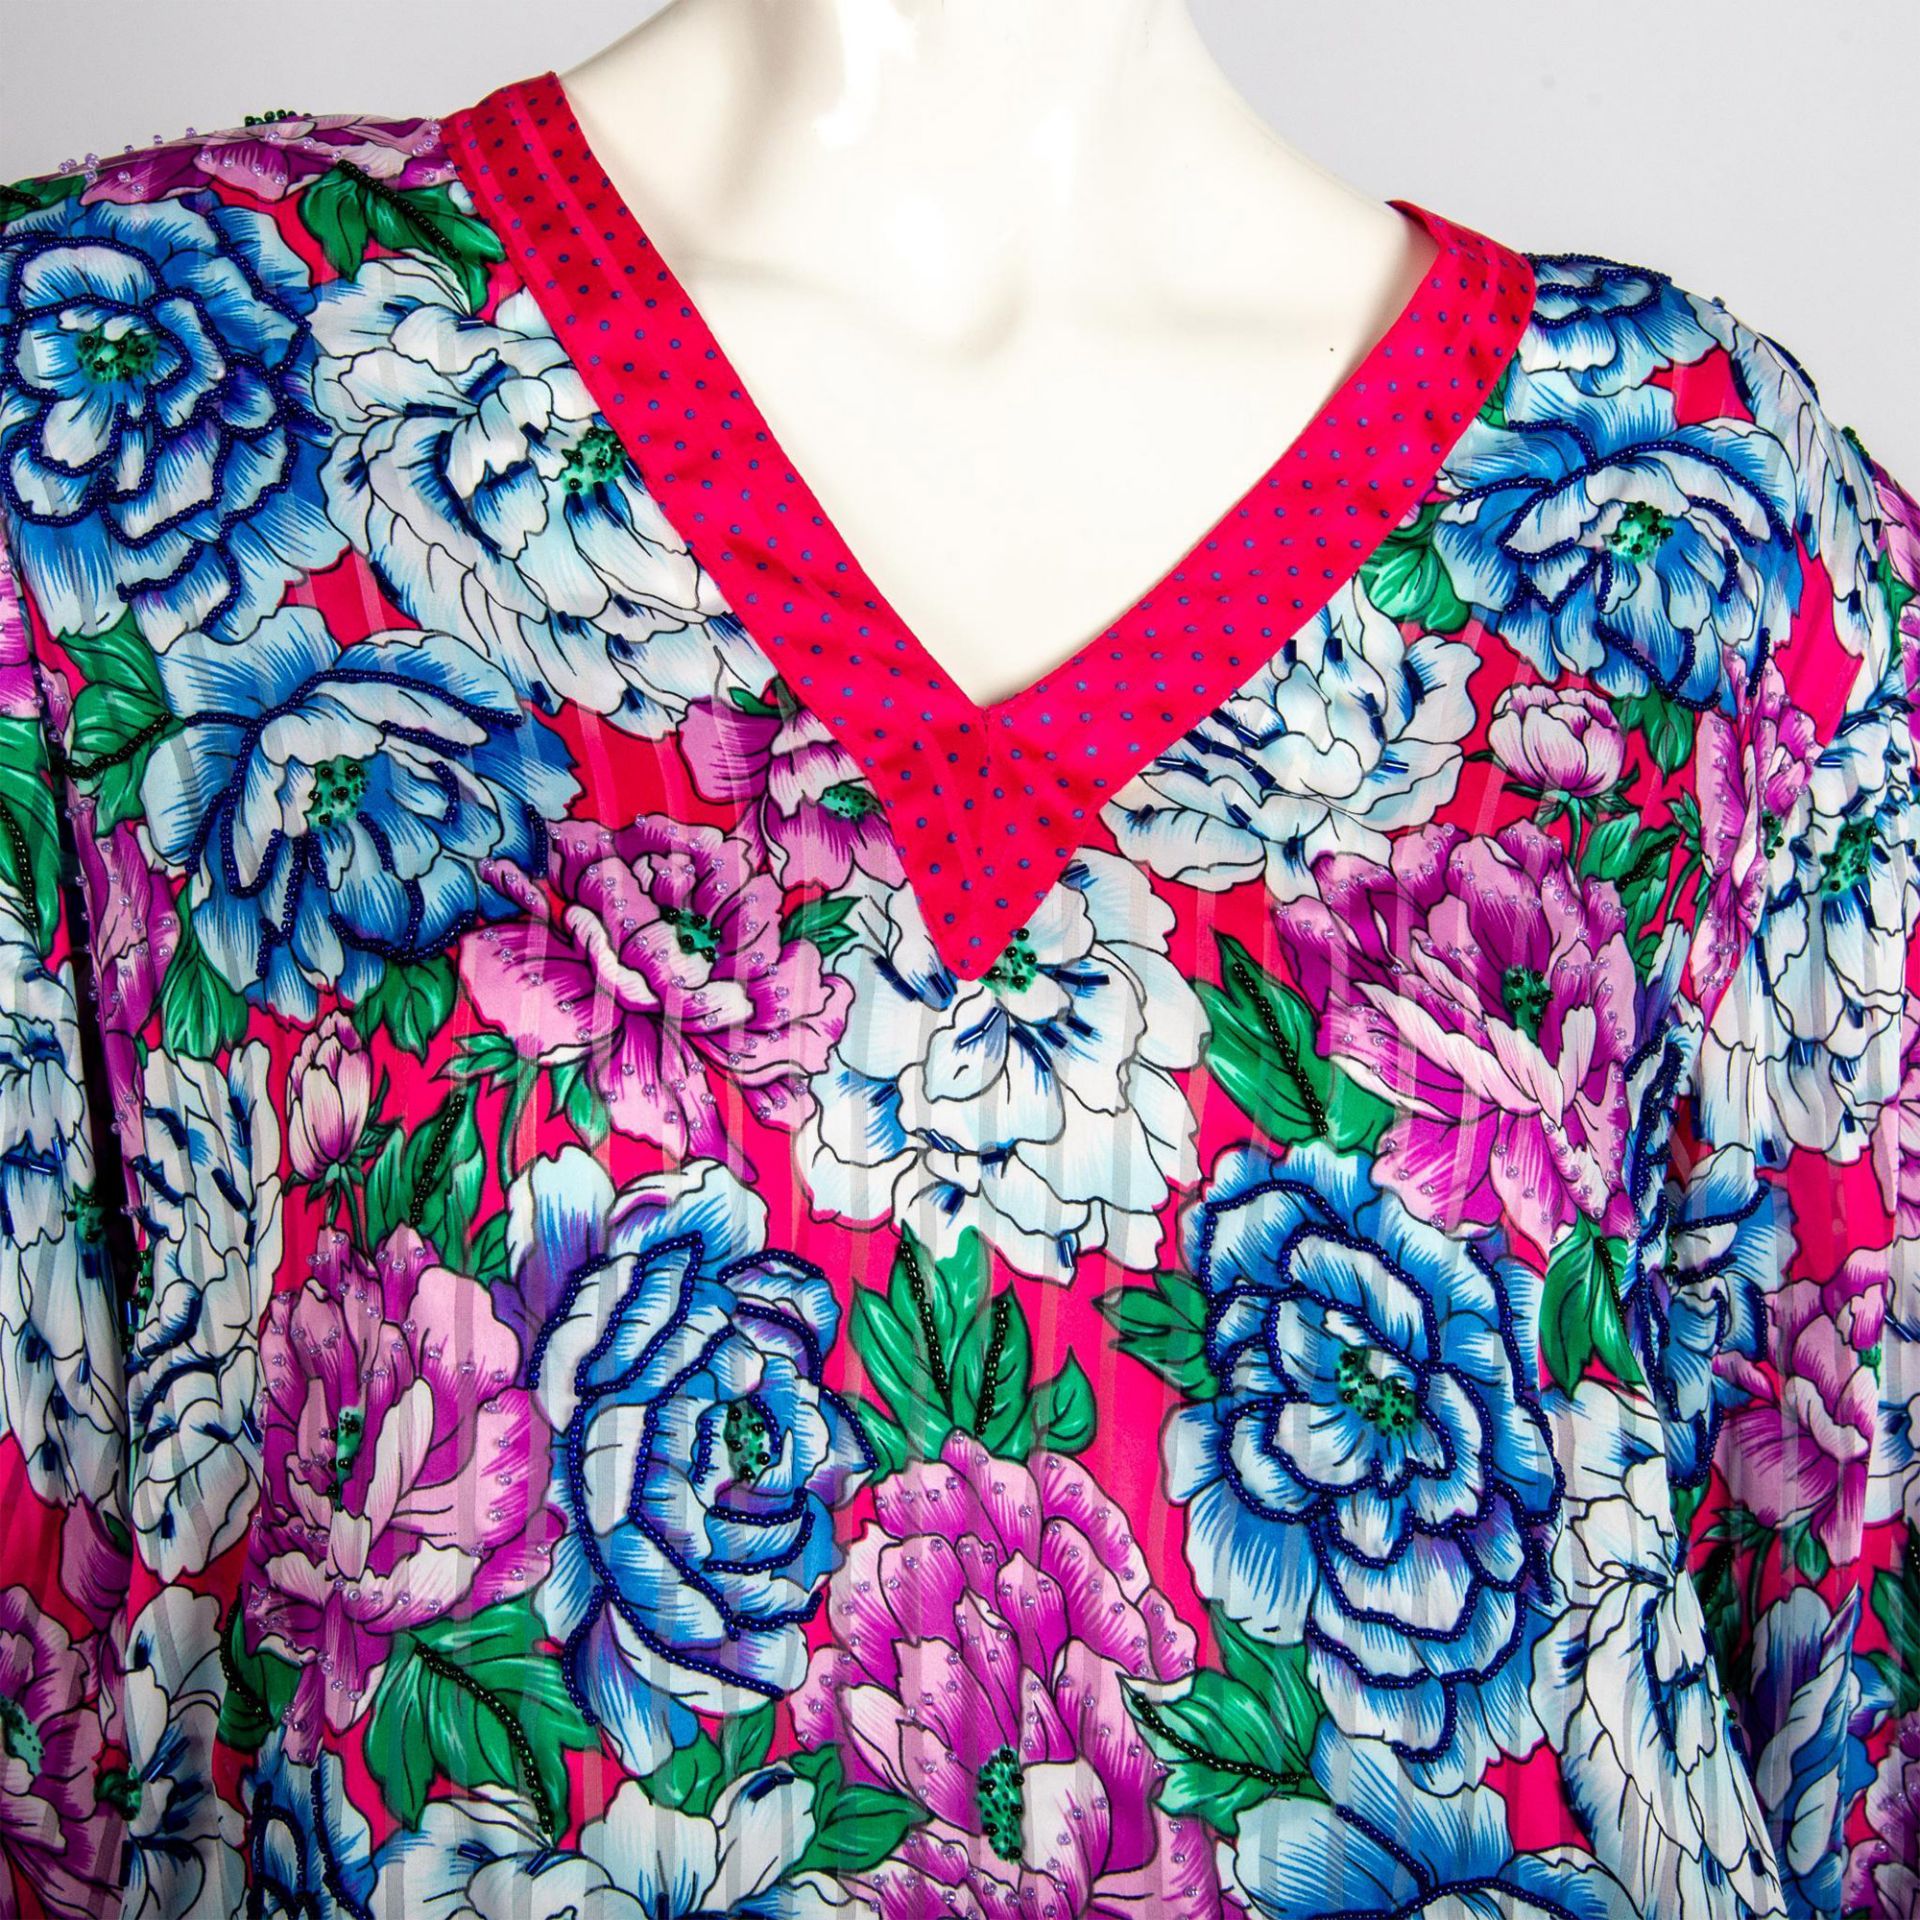 Diane Fres Beaded Floral Blouse - Image 2 of 5